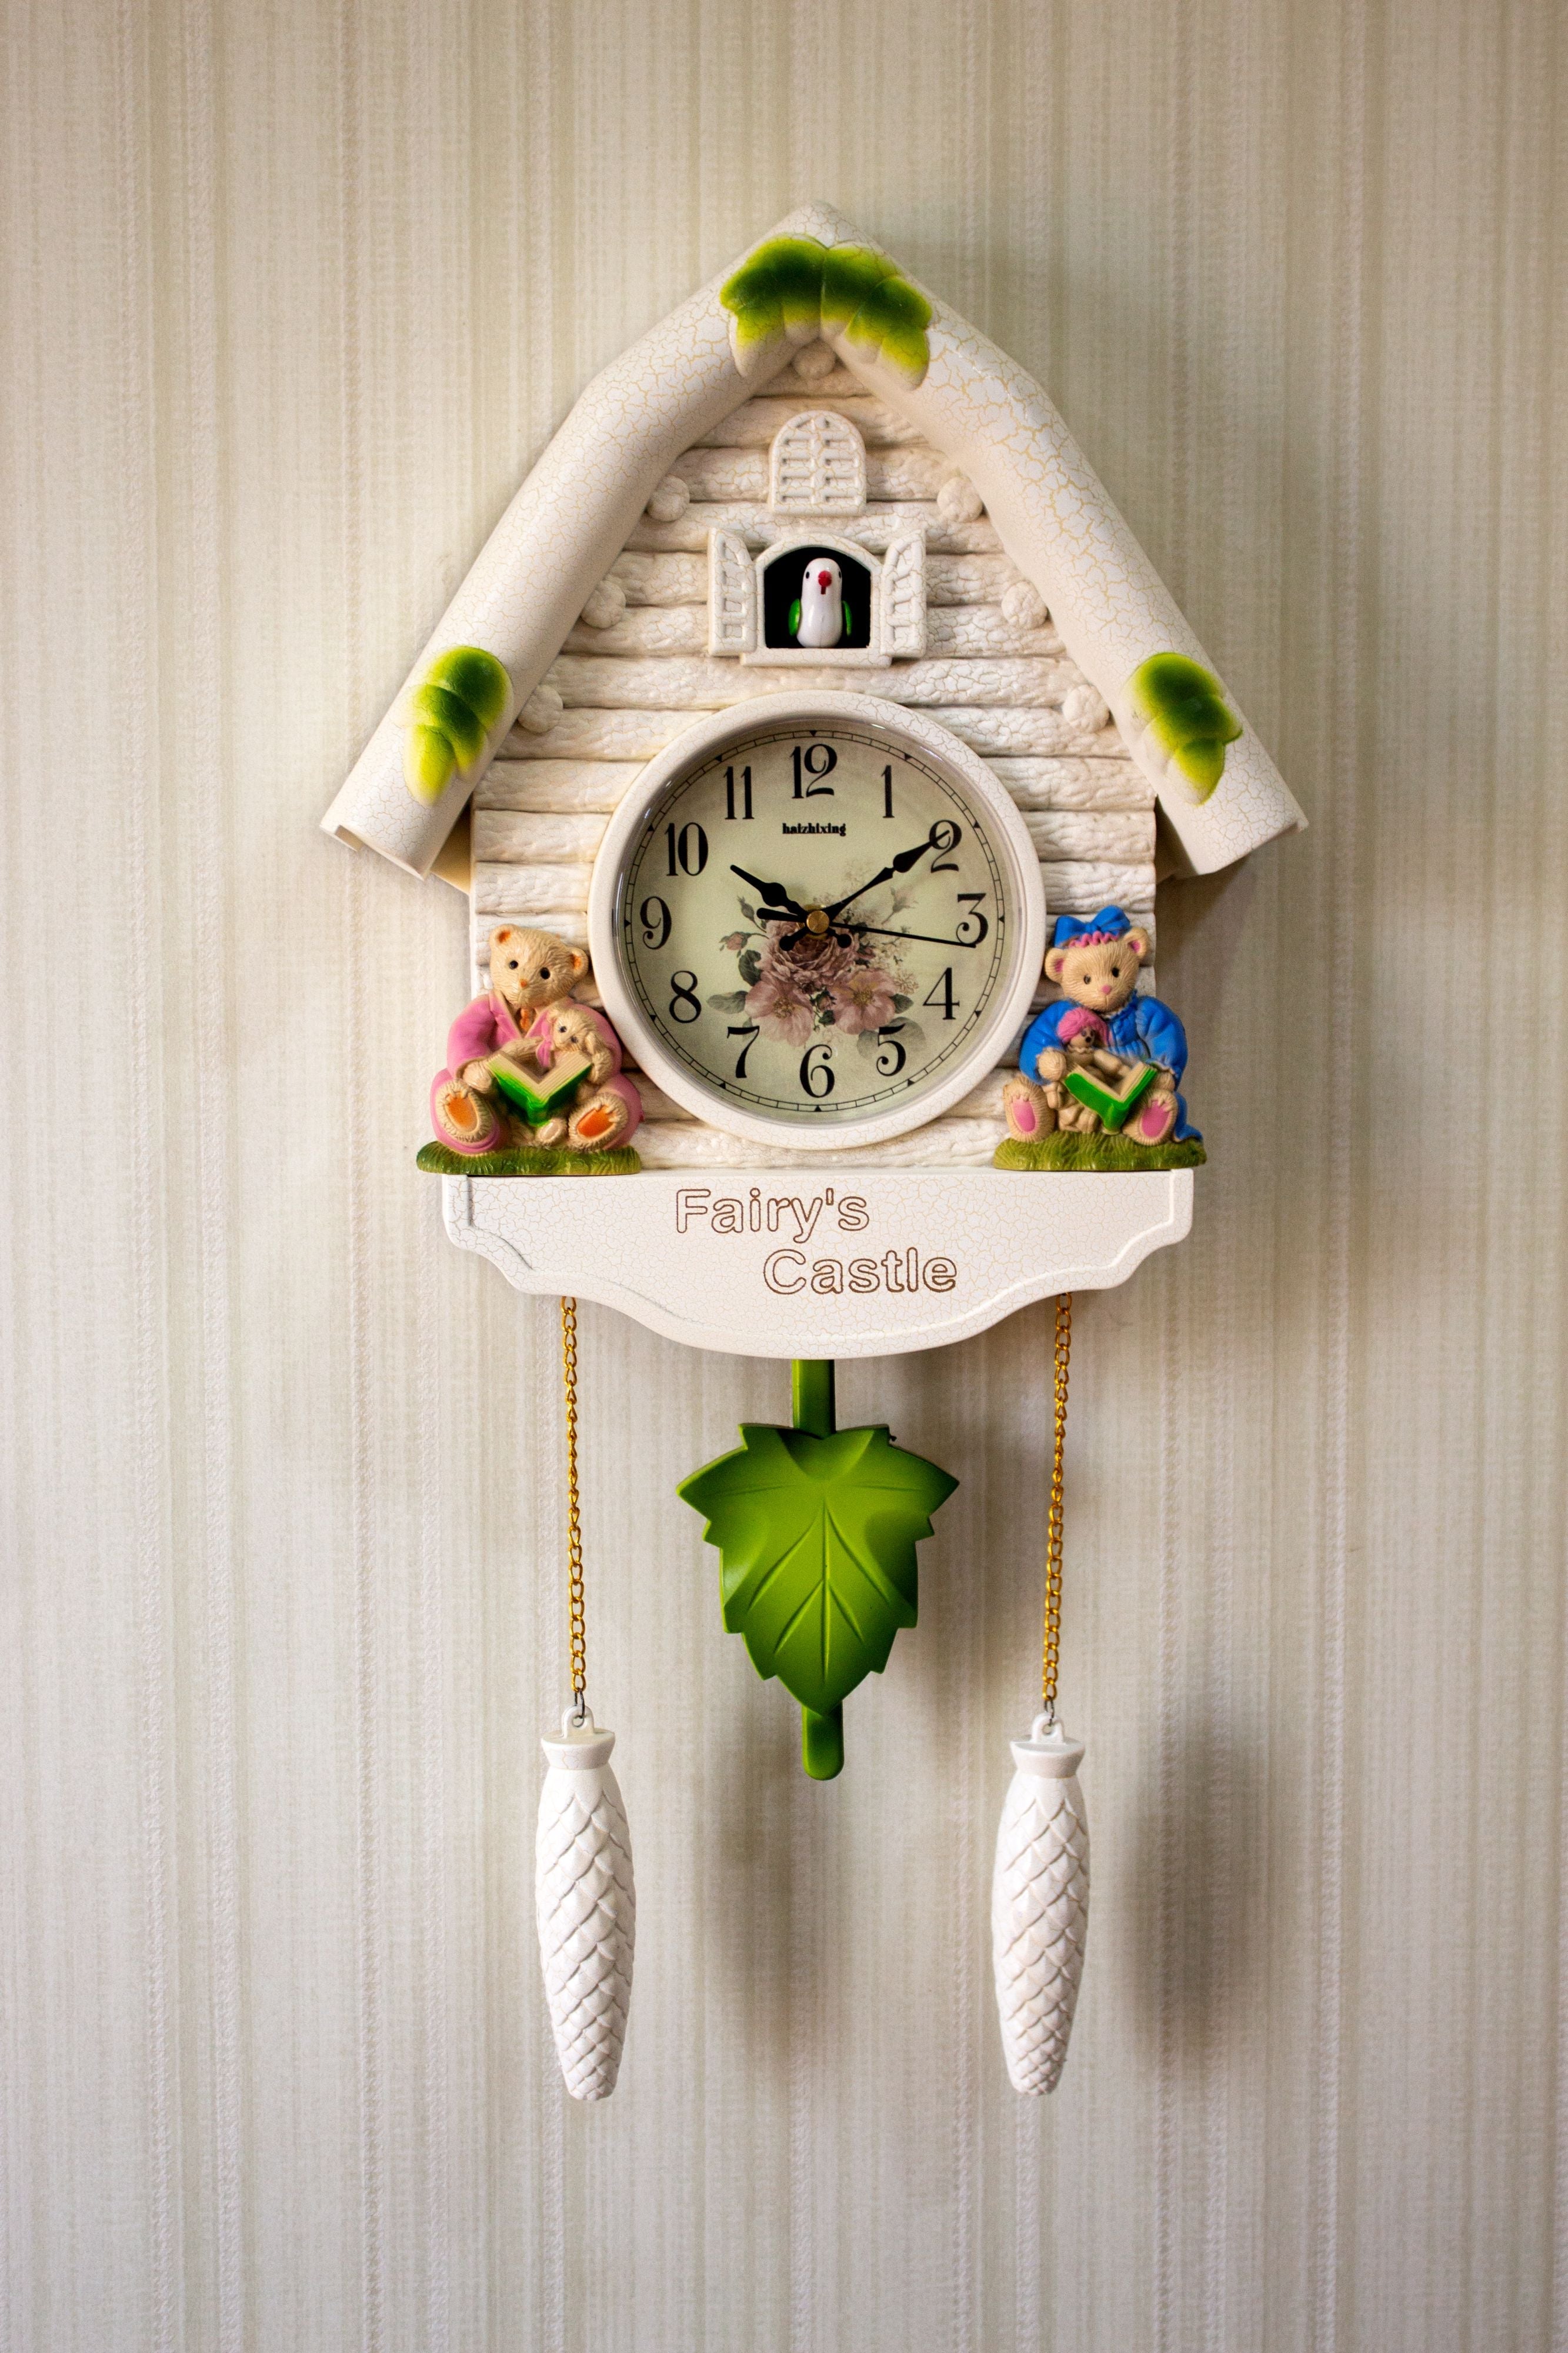 FunkyTradition Hanging Cuckoo Wall Clock for Home Office Decor and Gifts 60 CM Tall- FunkyTradition